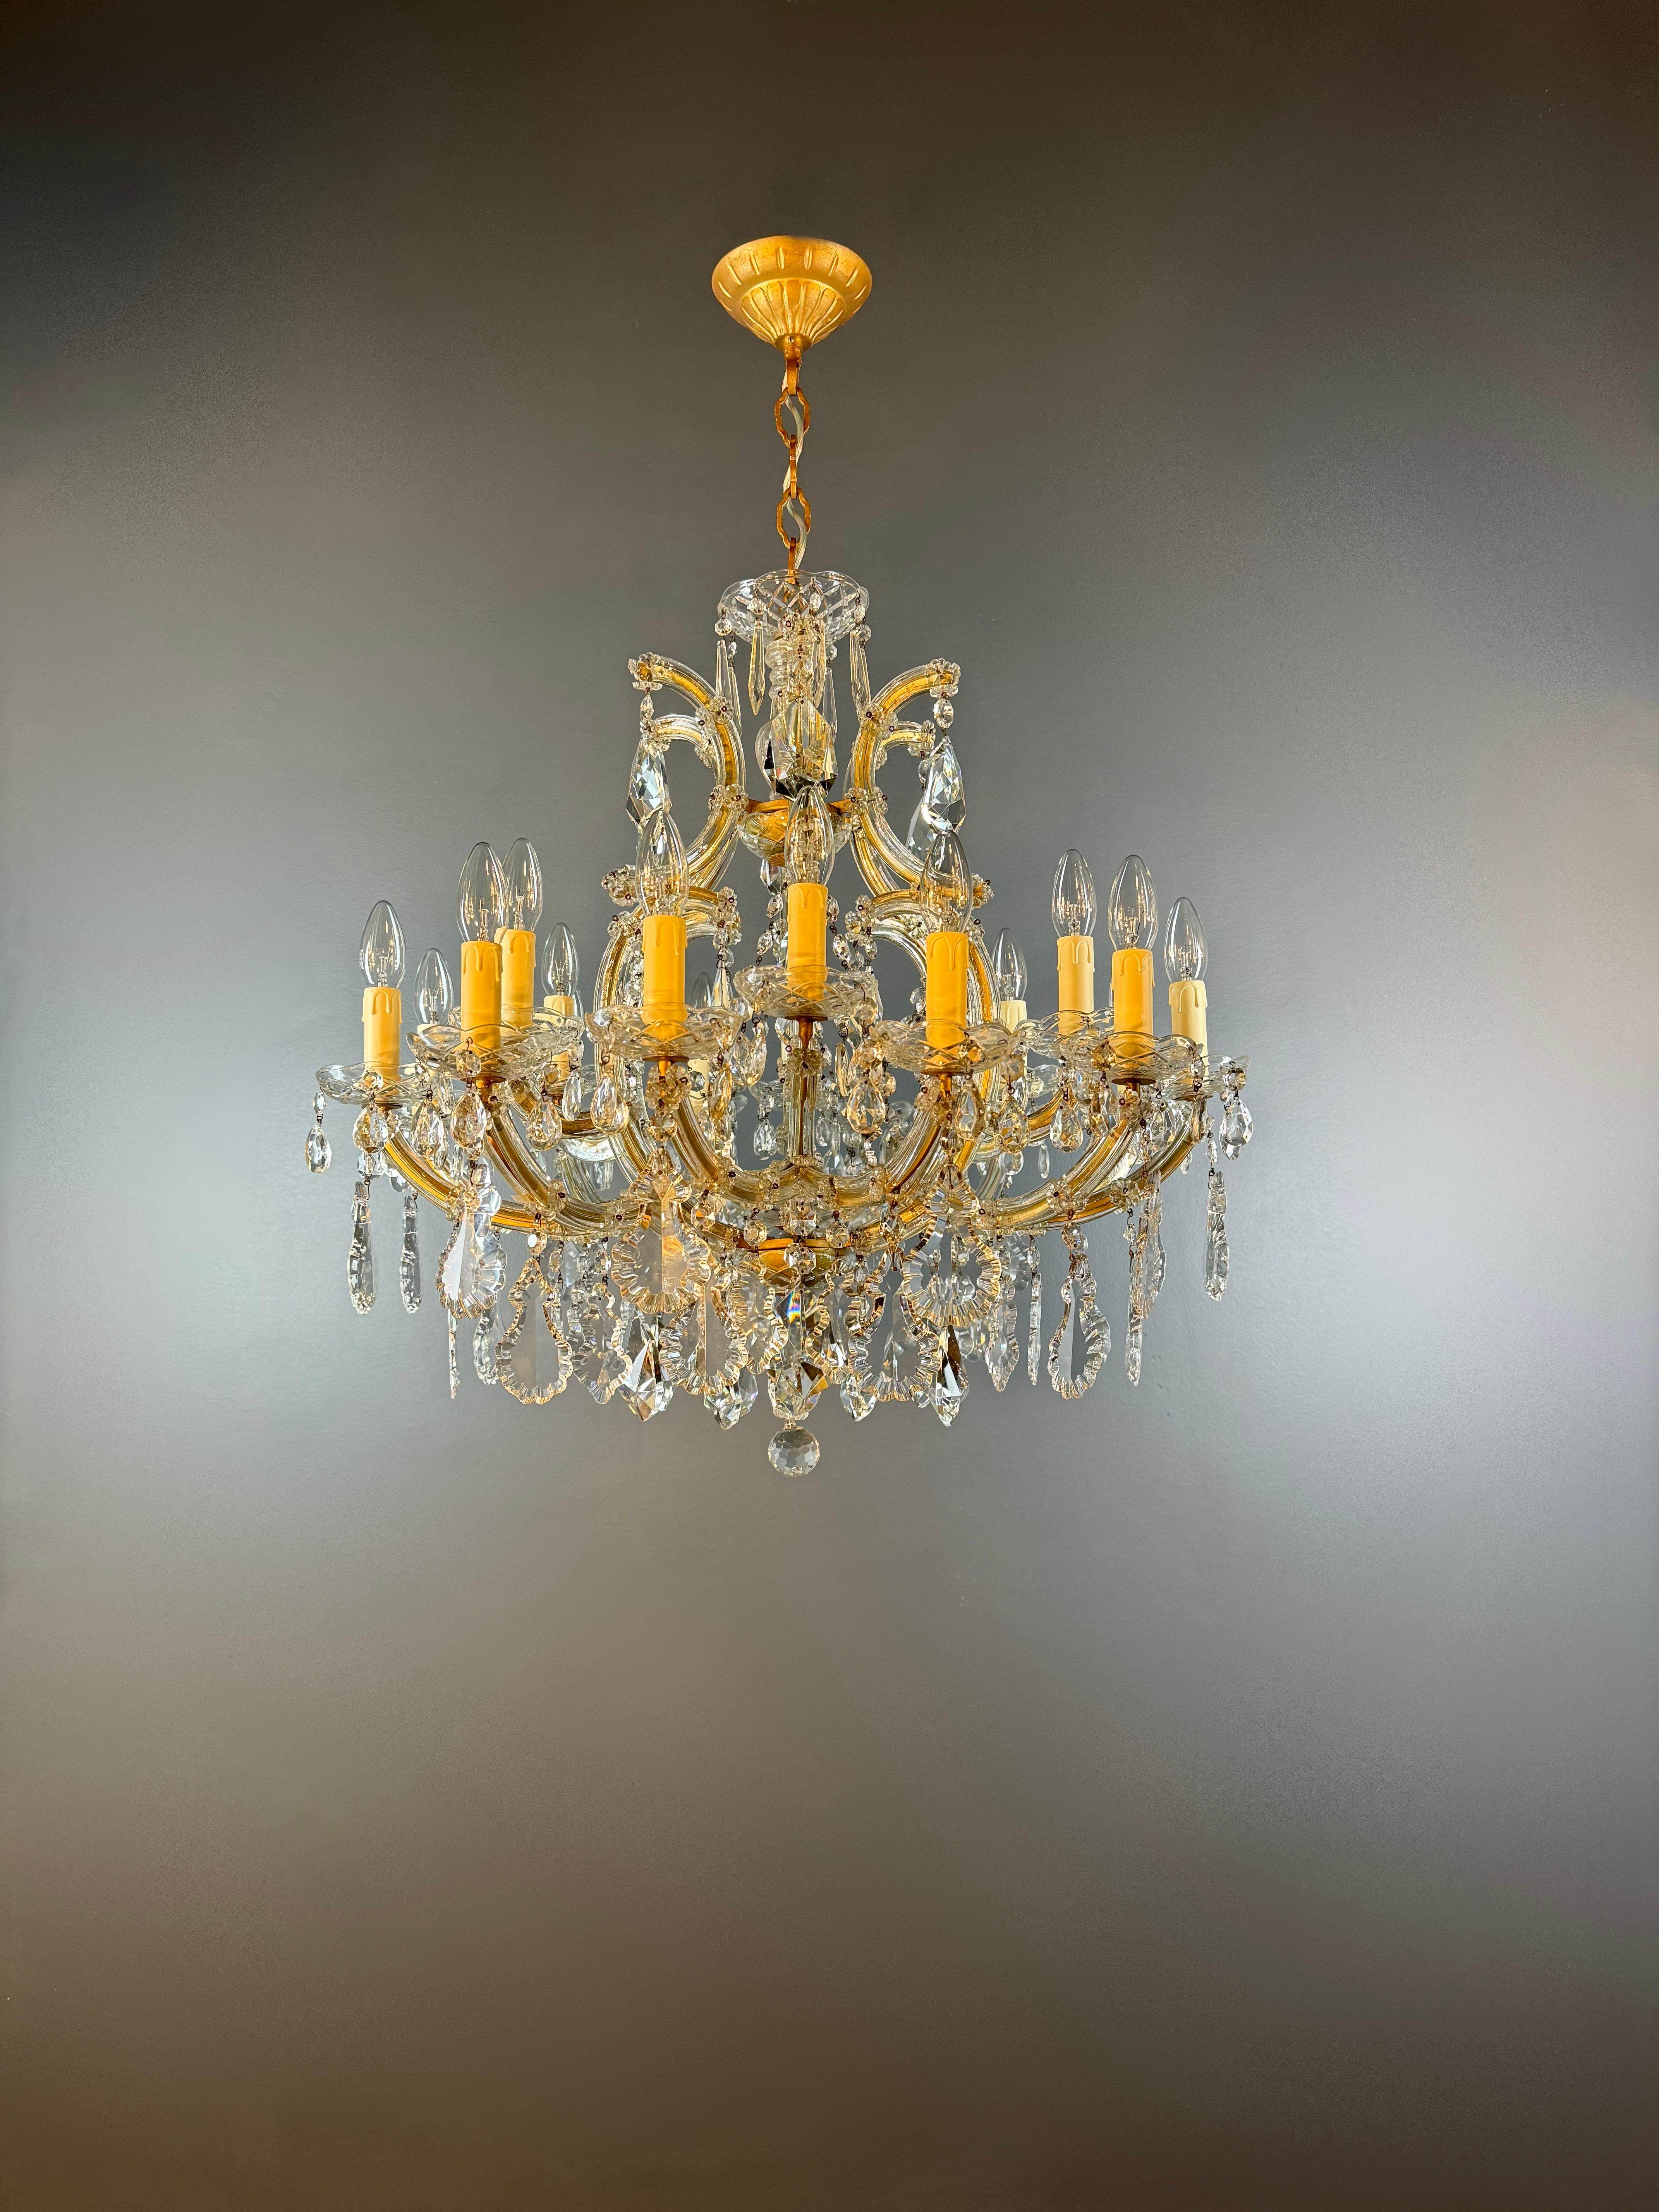 We present to you an exquisite Maria Theresa chandelier chandelier ceiling light made of brass in the Art Nouveau style - a real rarity and an antique jewel. This vintage chandelier was lovingly and professionally restored in Berlin and its